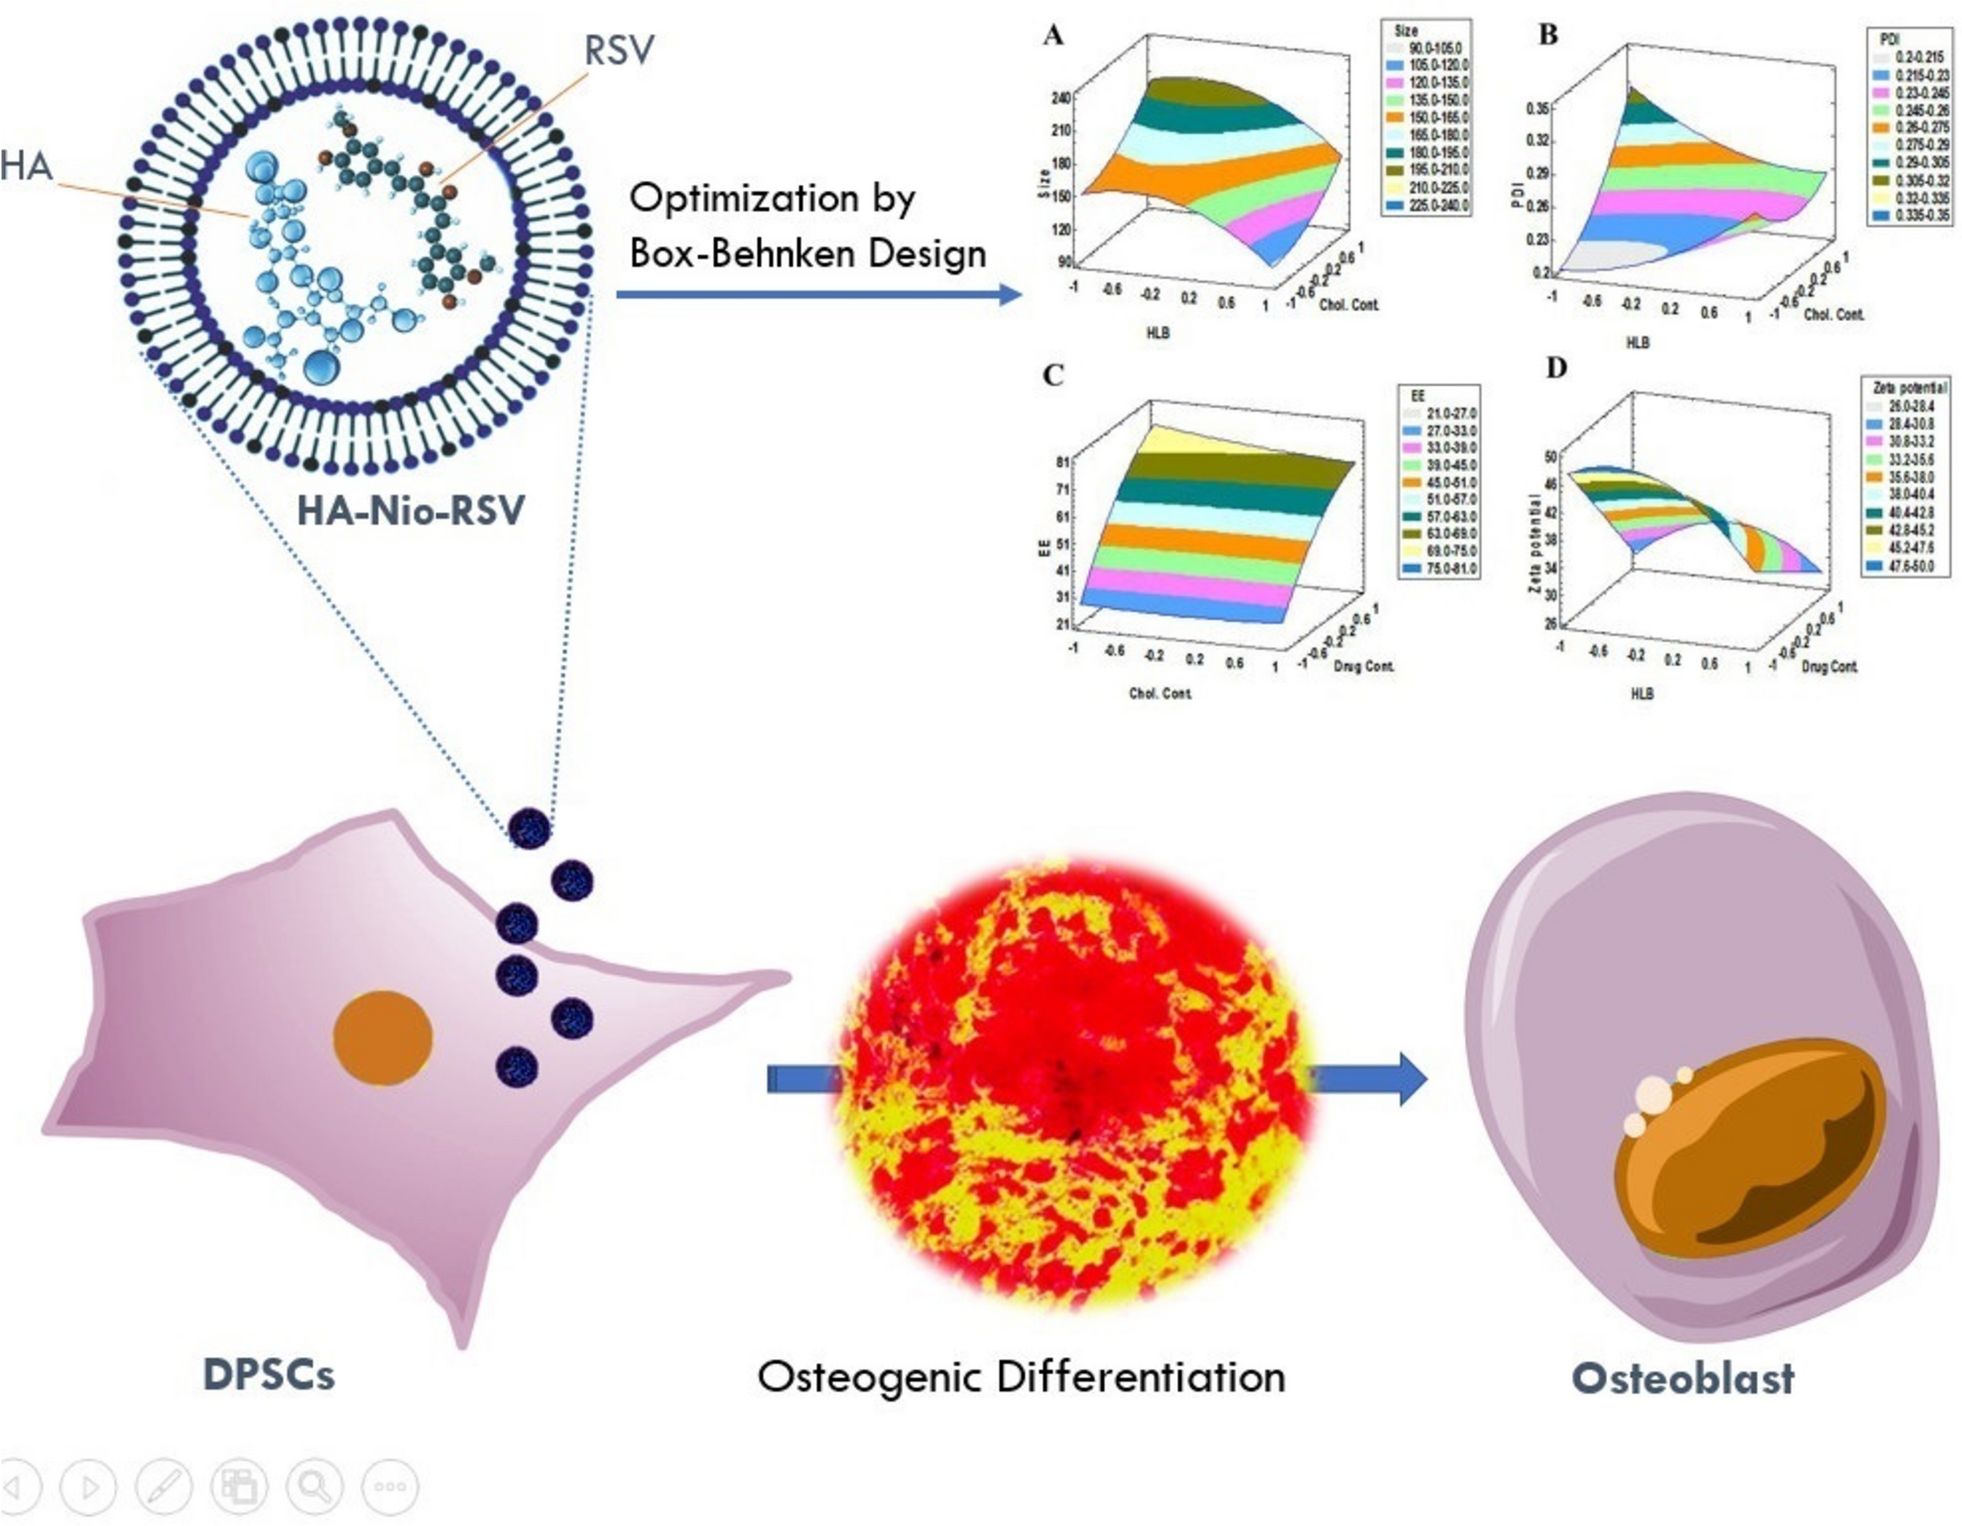 Enhancing osteogenic differentiation of dental pulp stem cells through rosuvastatin loaded niosomes optimized by Box-Behnken design and modified by hyaluronan: a novel strategy for improved efficiency